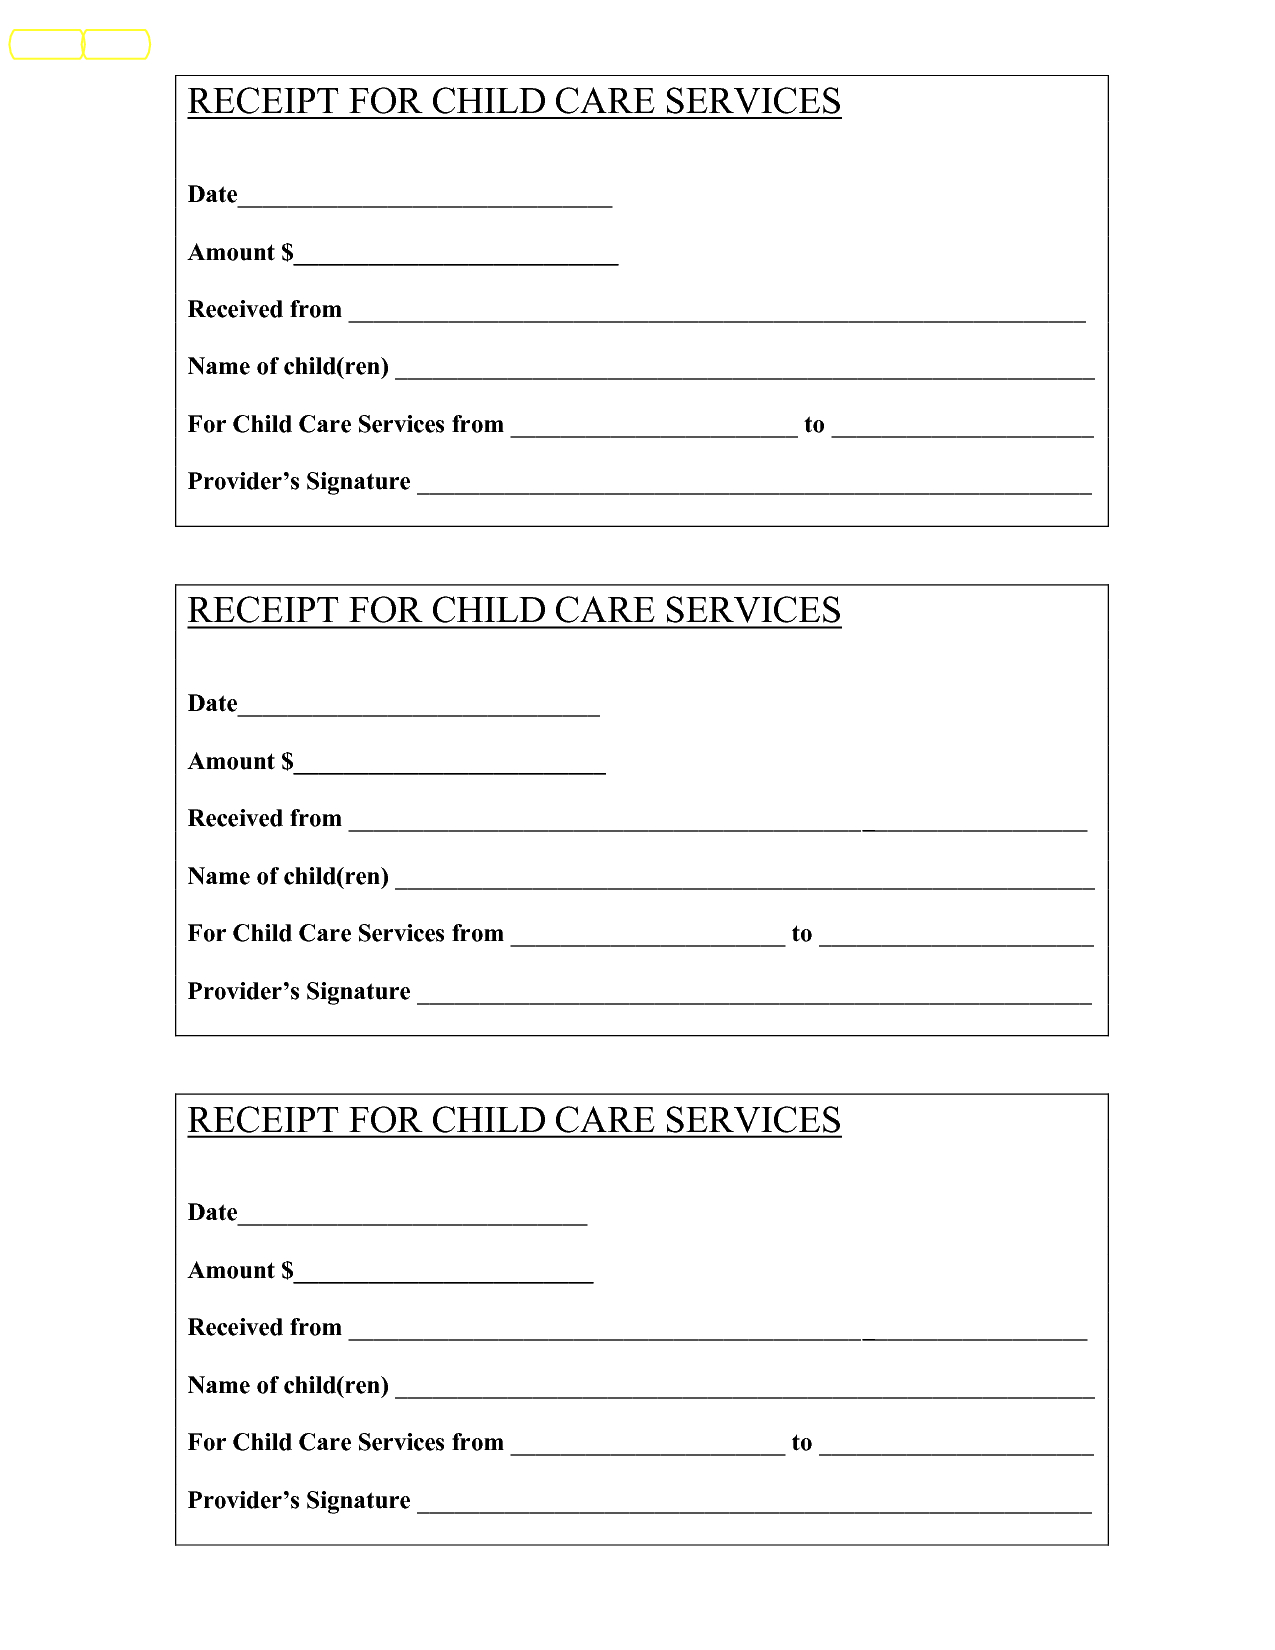 Babysitting Receipt - Bing Images | Baby | Child Care Services, Free - Free Printable Daycare Receipts